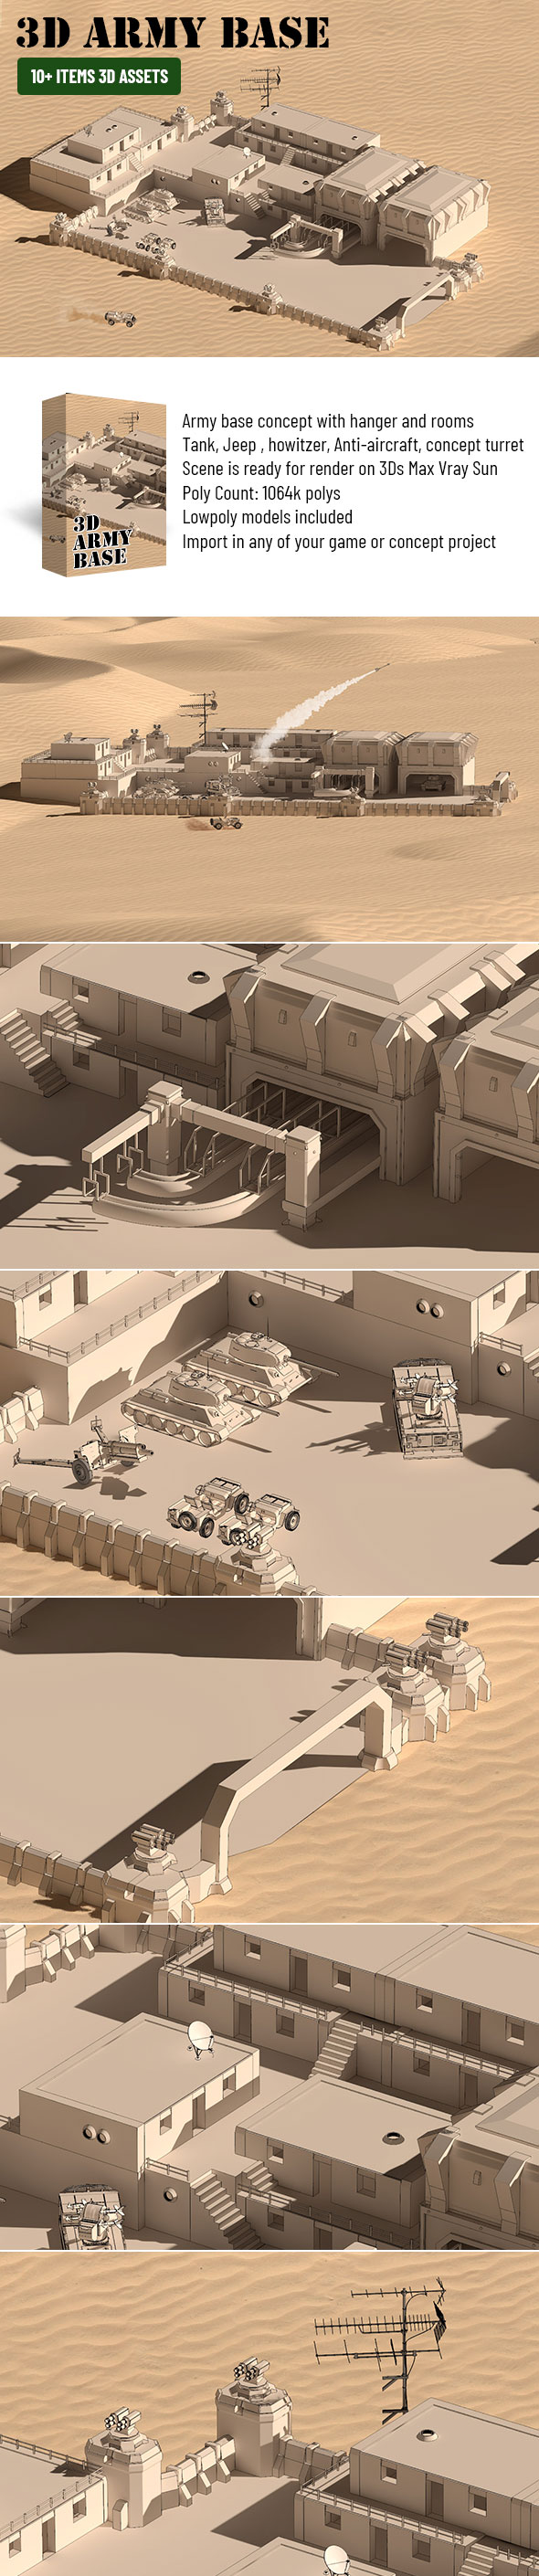 3D army base / military base concept low poly for games